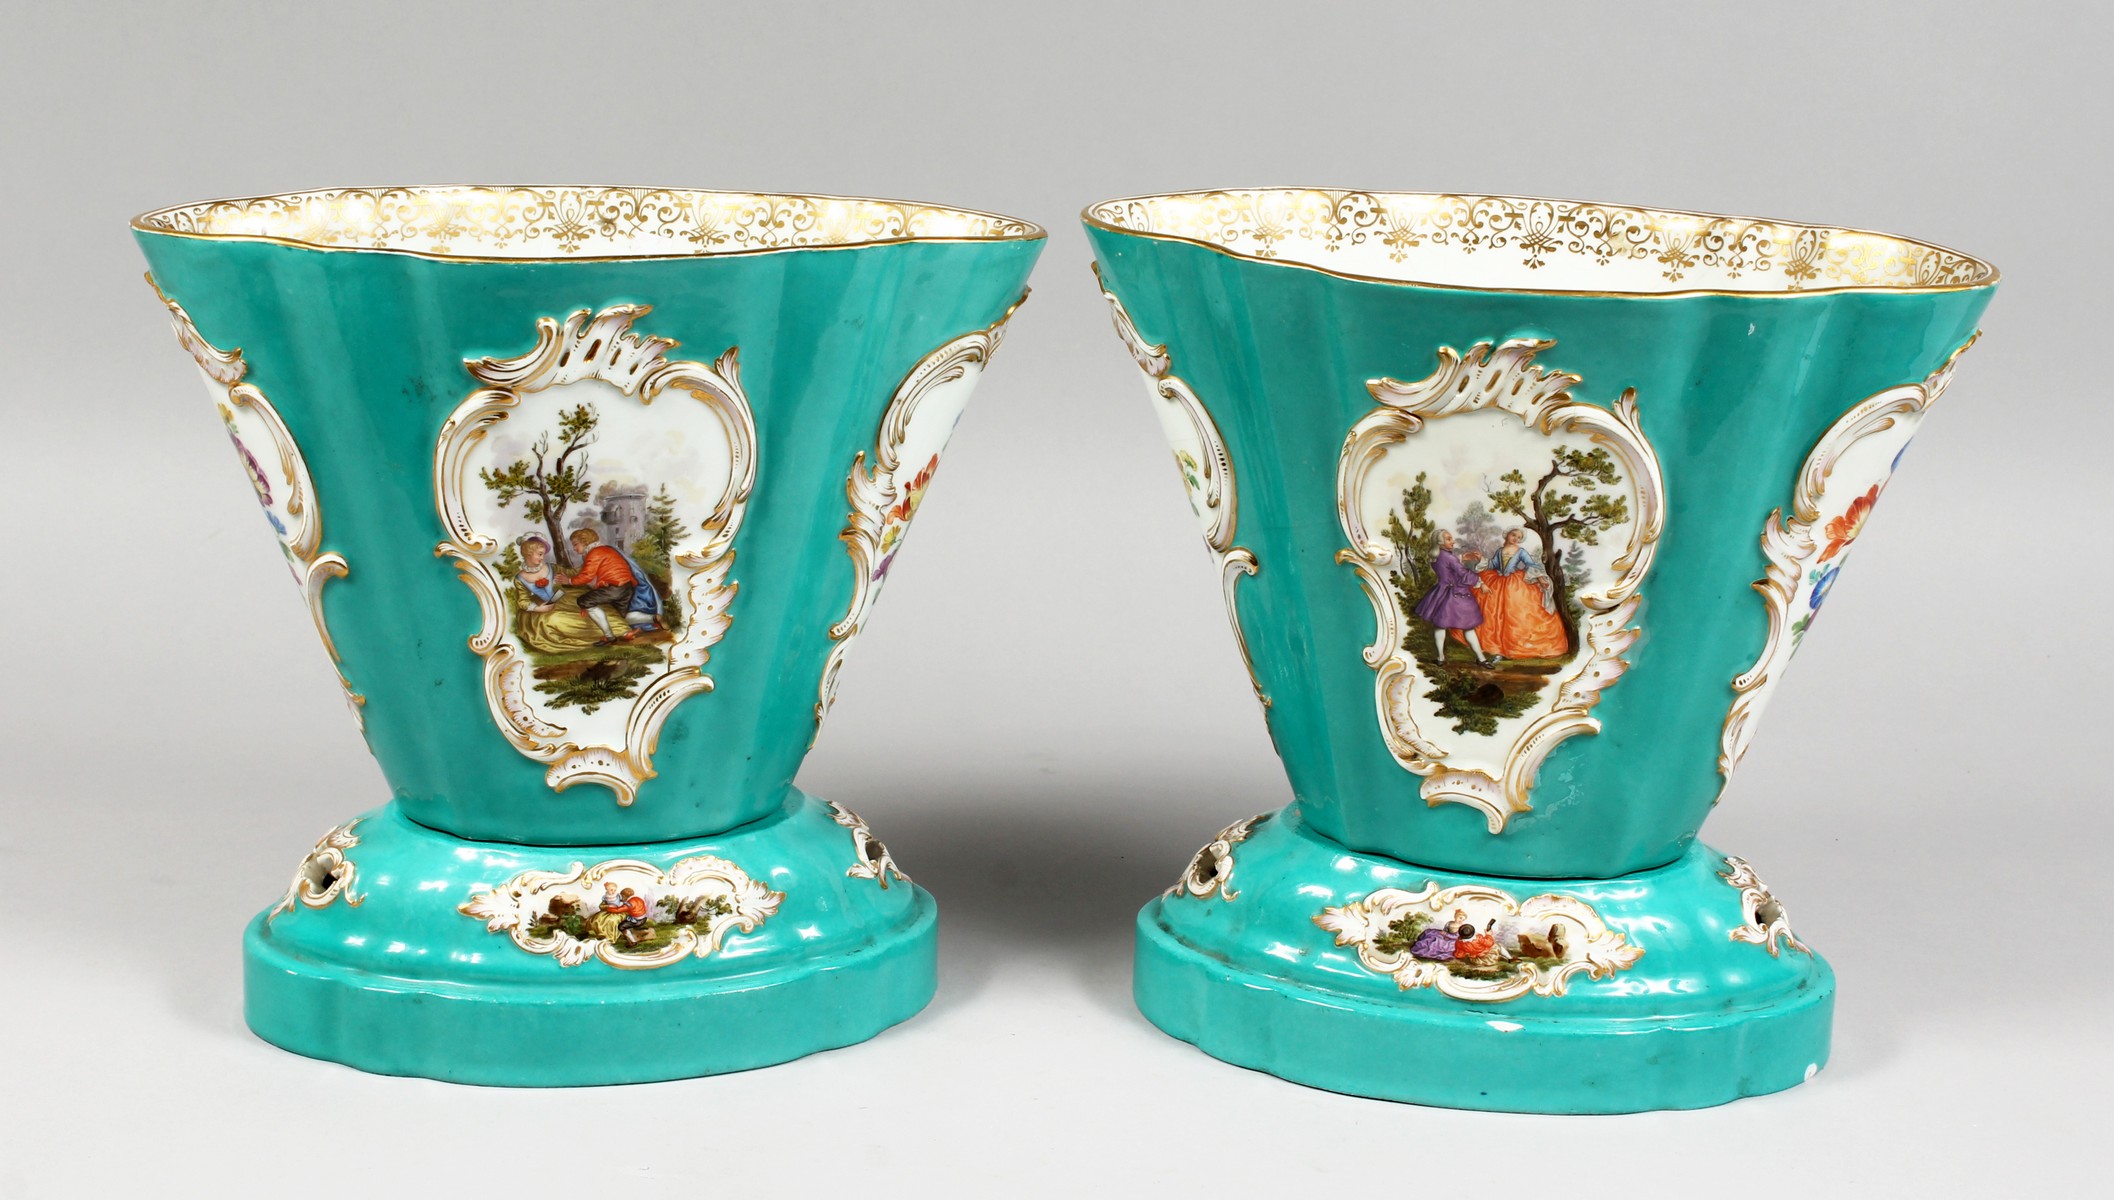 A VERY GOOD PAIR OF EARLY 19TH CENTURY MEISSEN OVAL TAPERING VASES ON STANDS, painted with panels of